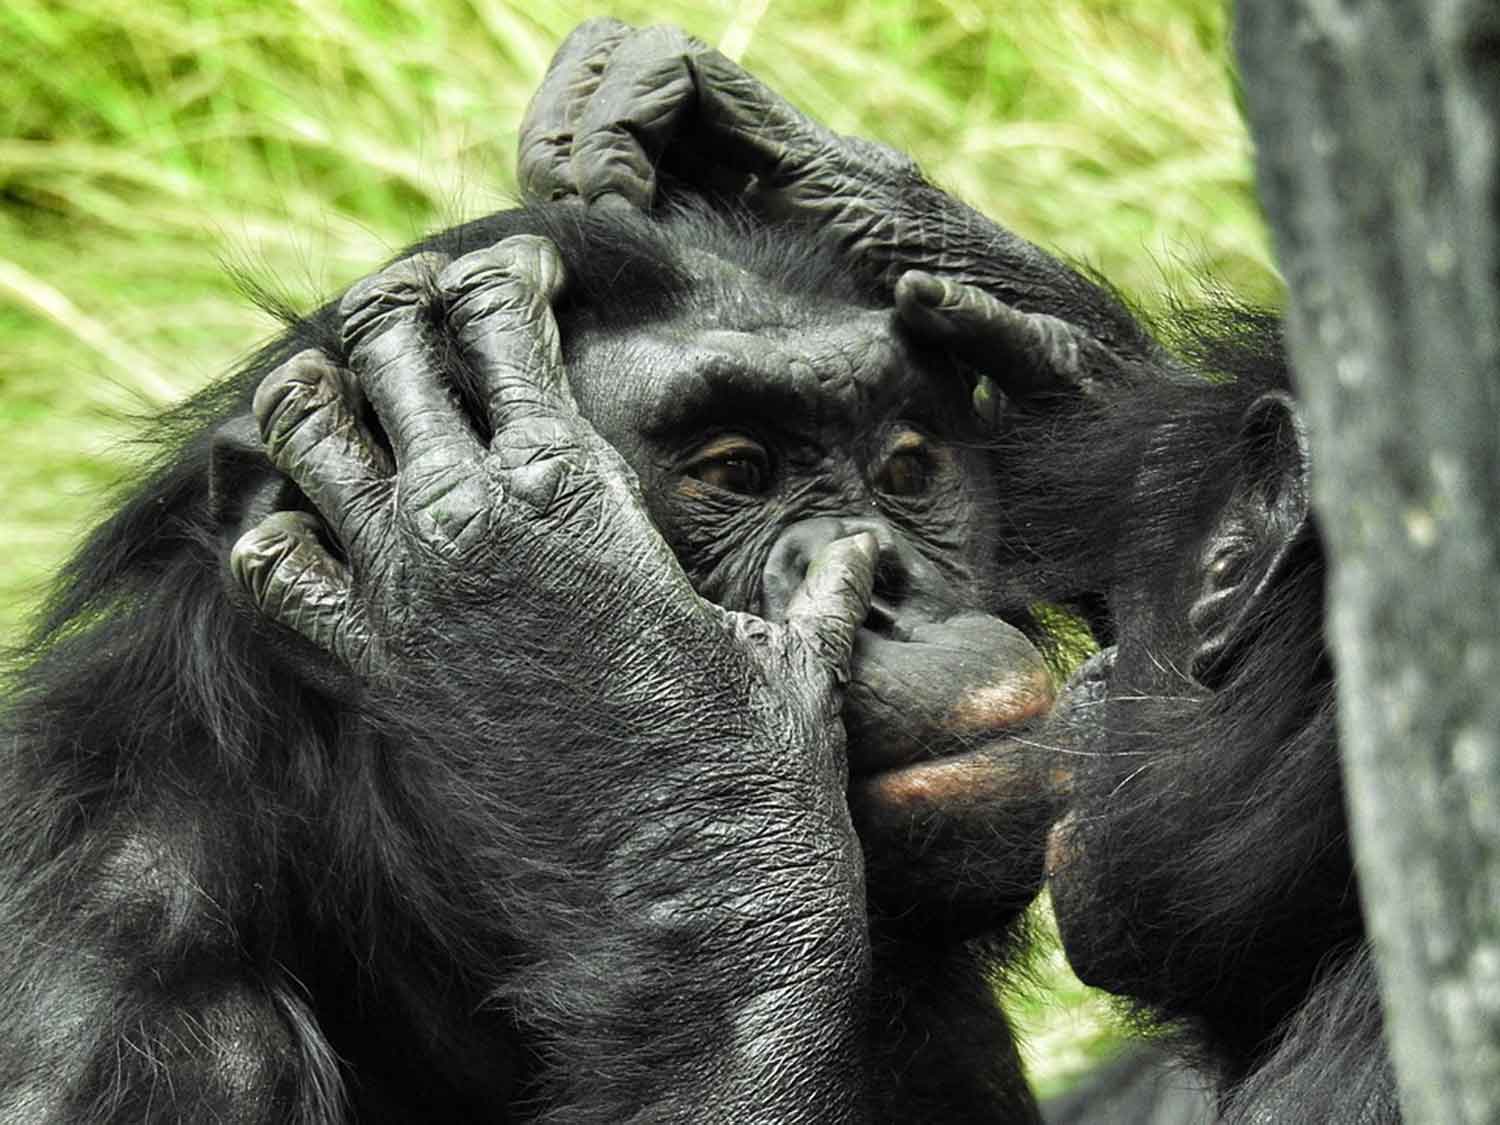 A bonobo having its face groomed by another bonobo